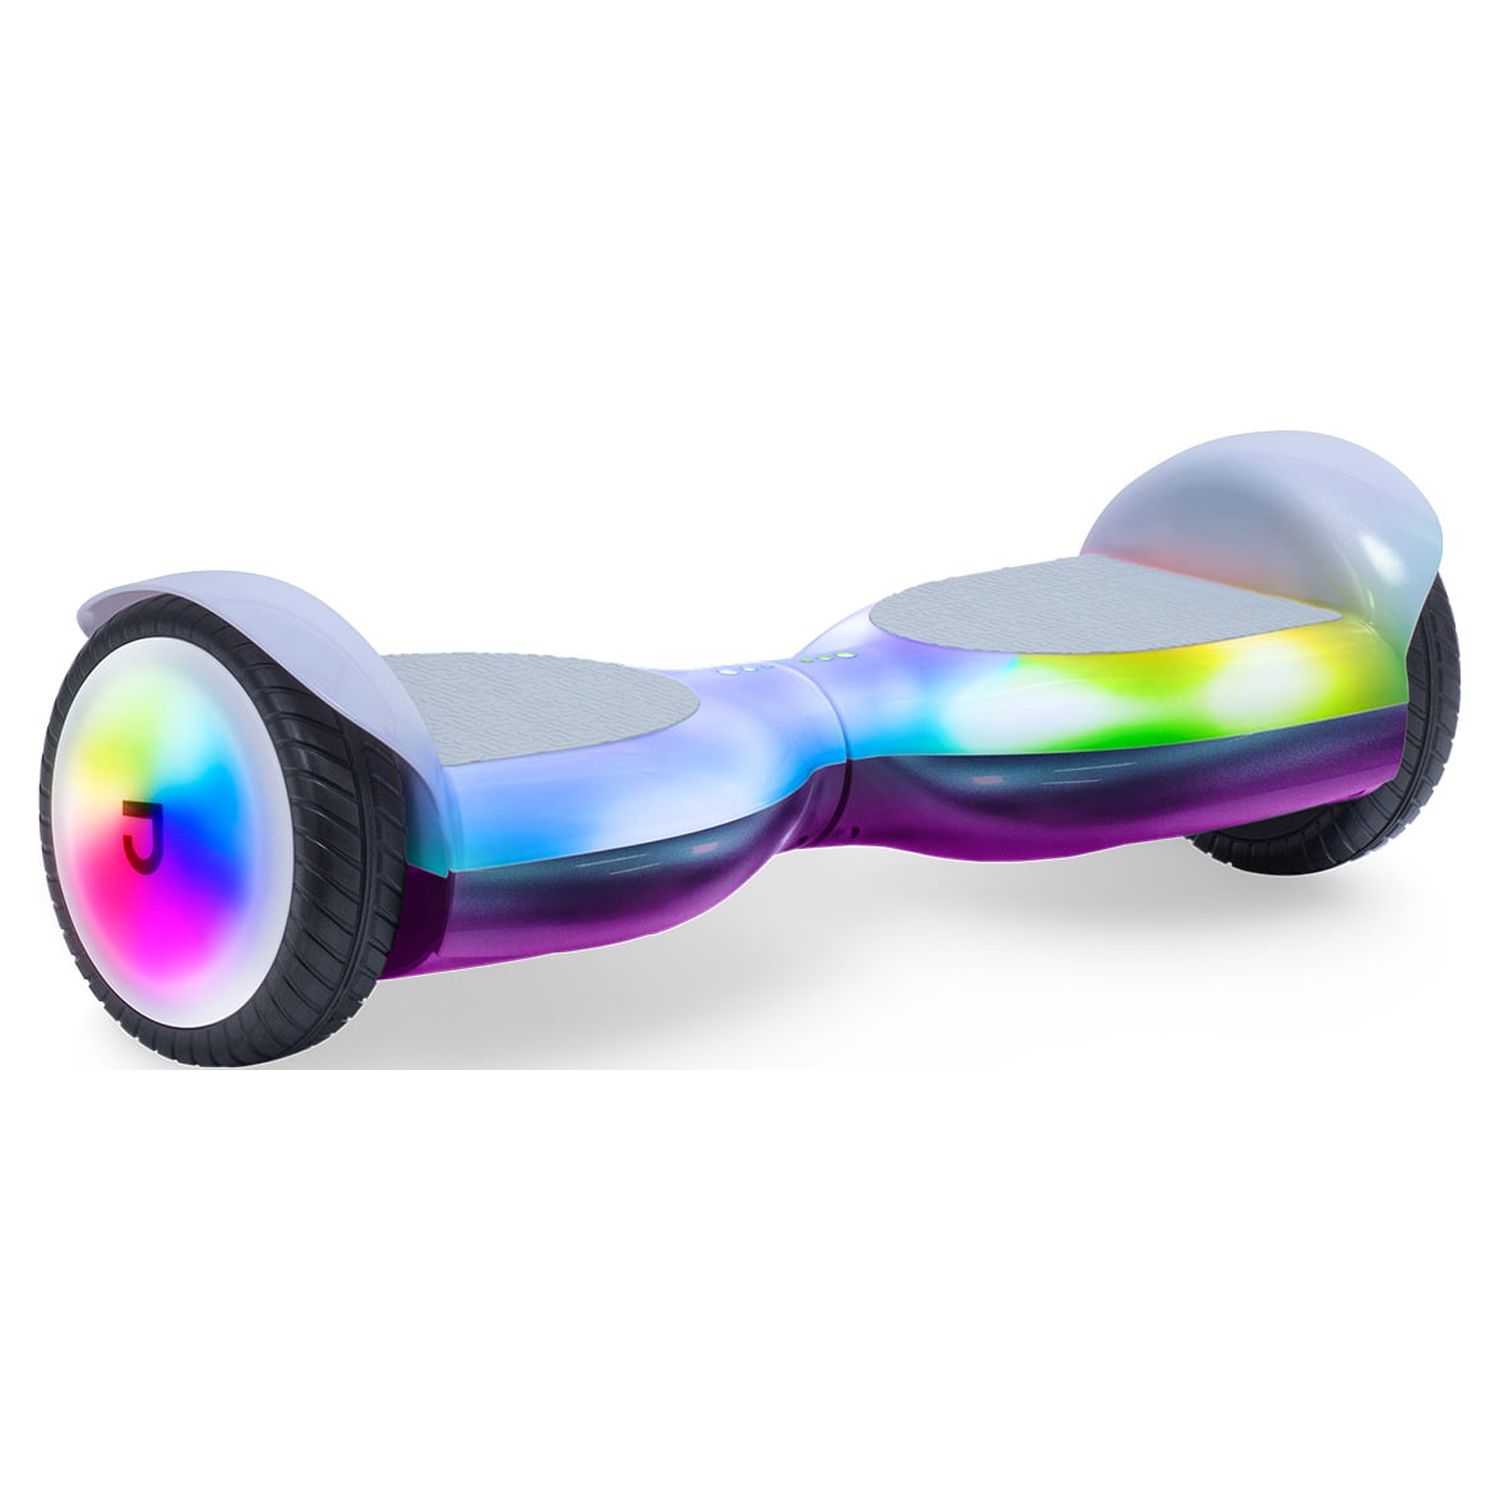 Jetson Plasma X Lava Tech Hoverboard, Ages 12+ - image 5 of 13